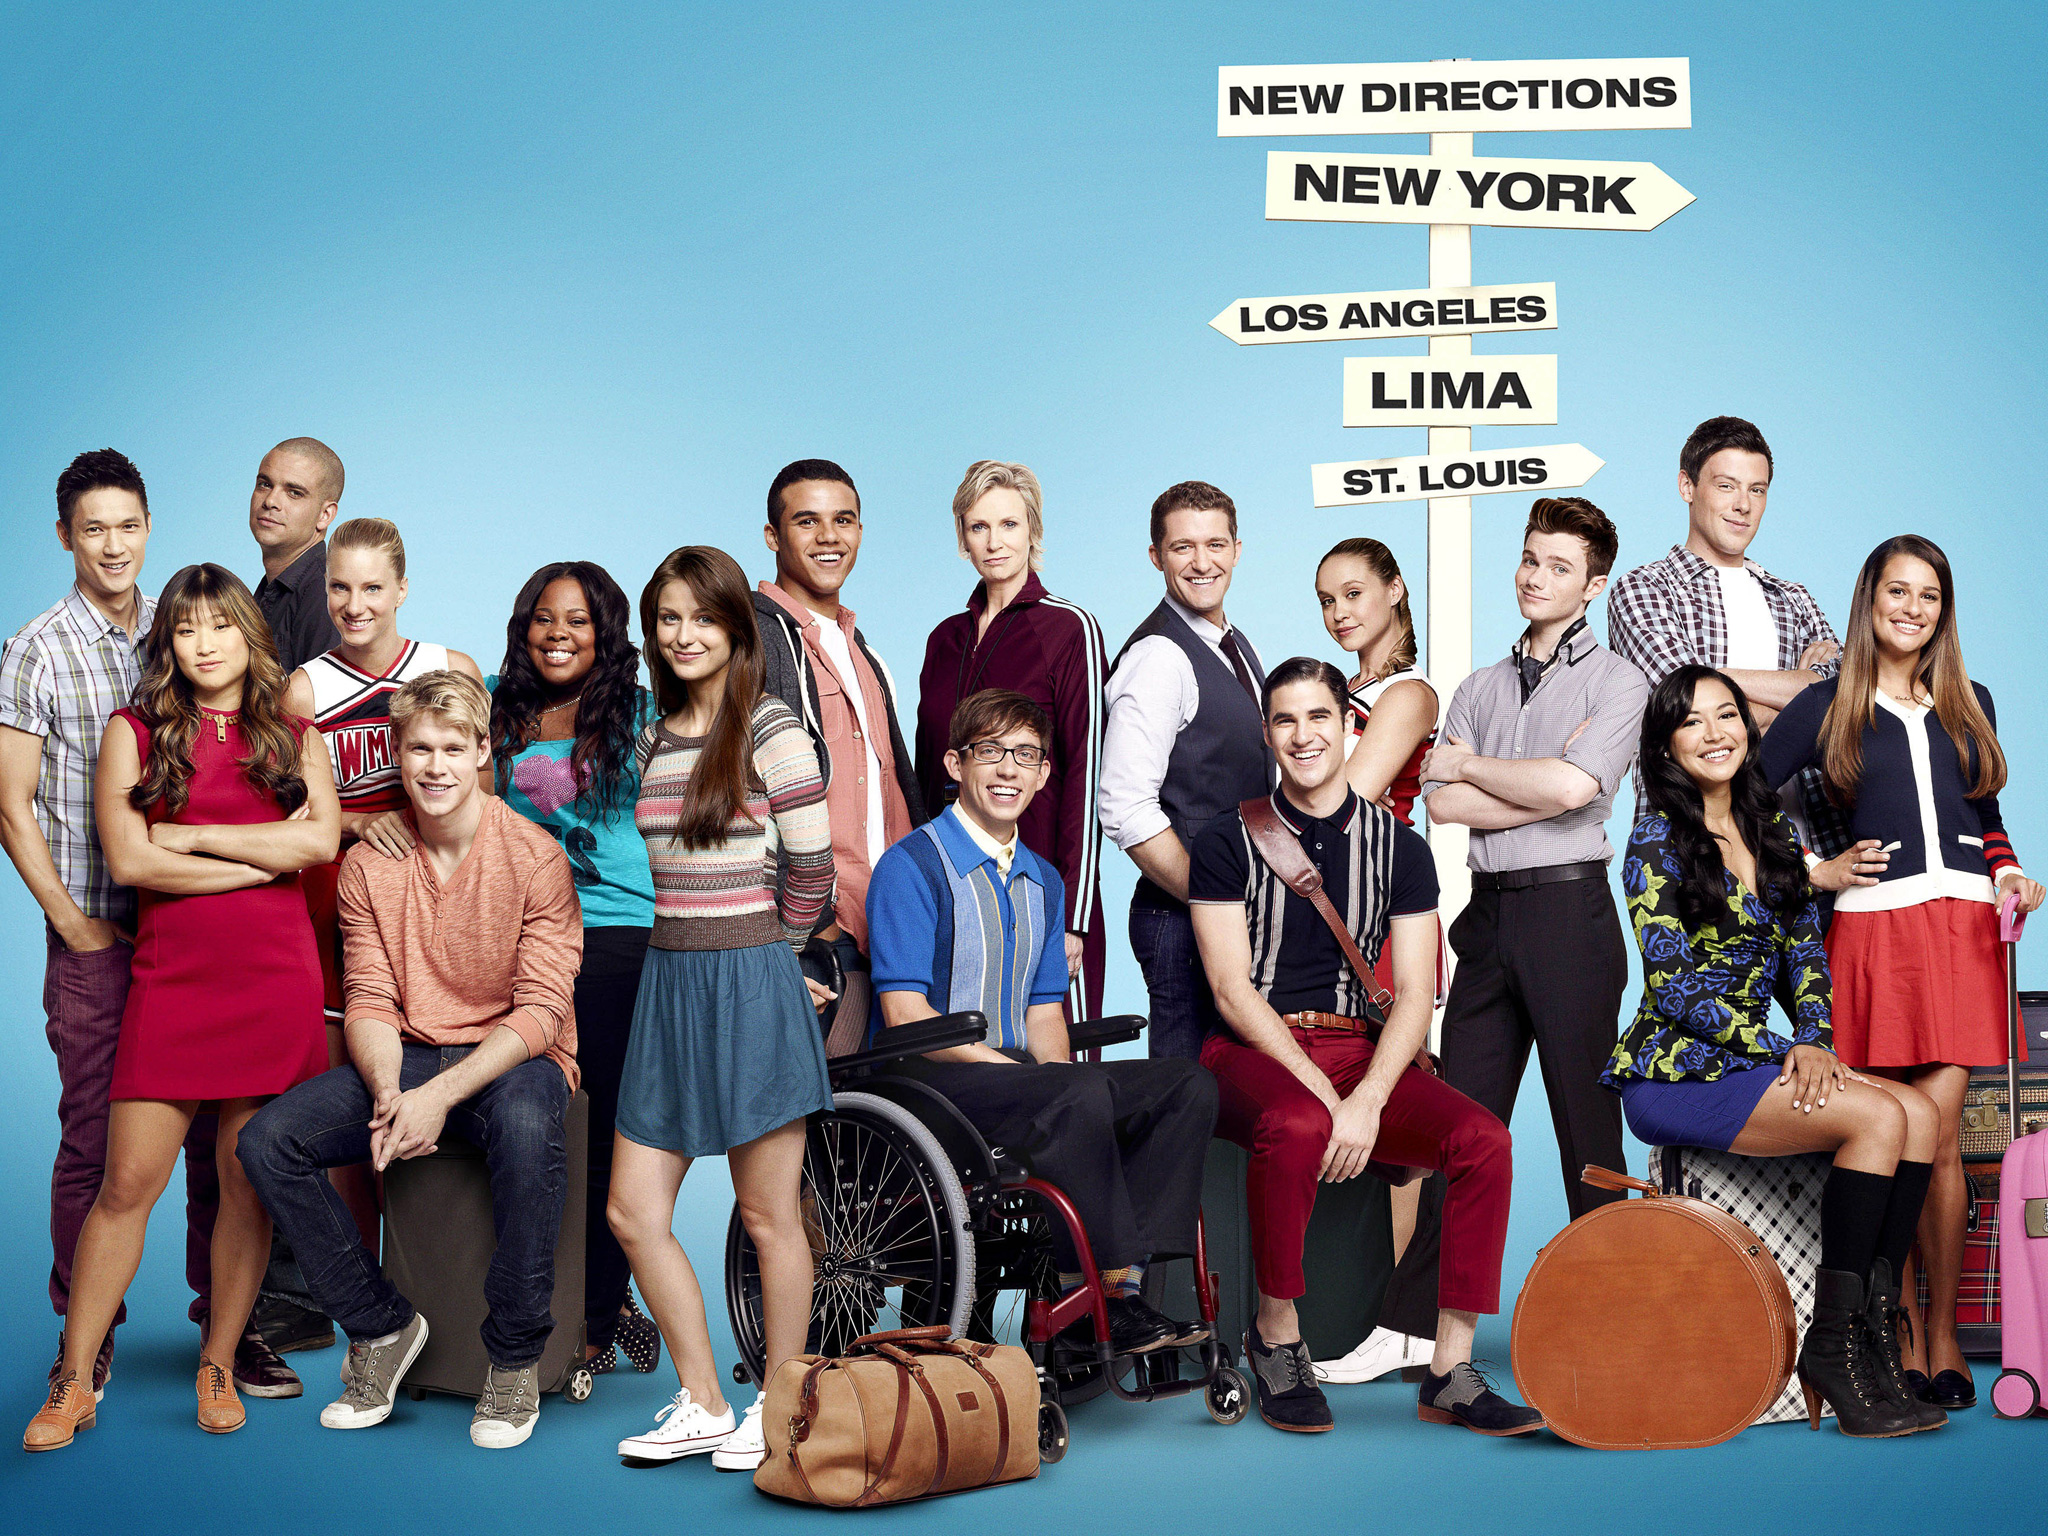 SPOILERS: Do not read this if you have not seen episode 1, series 4 of 'Glee'